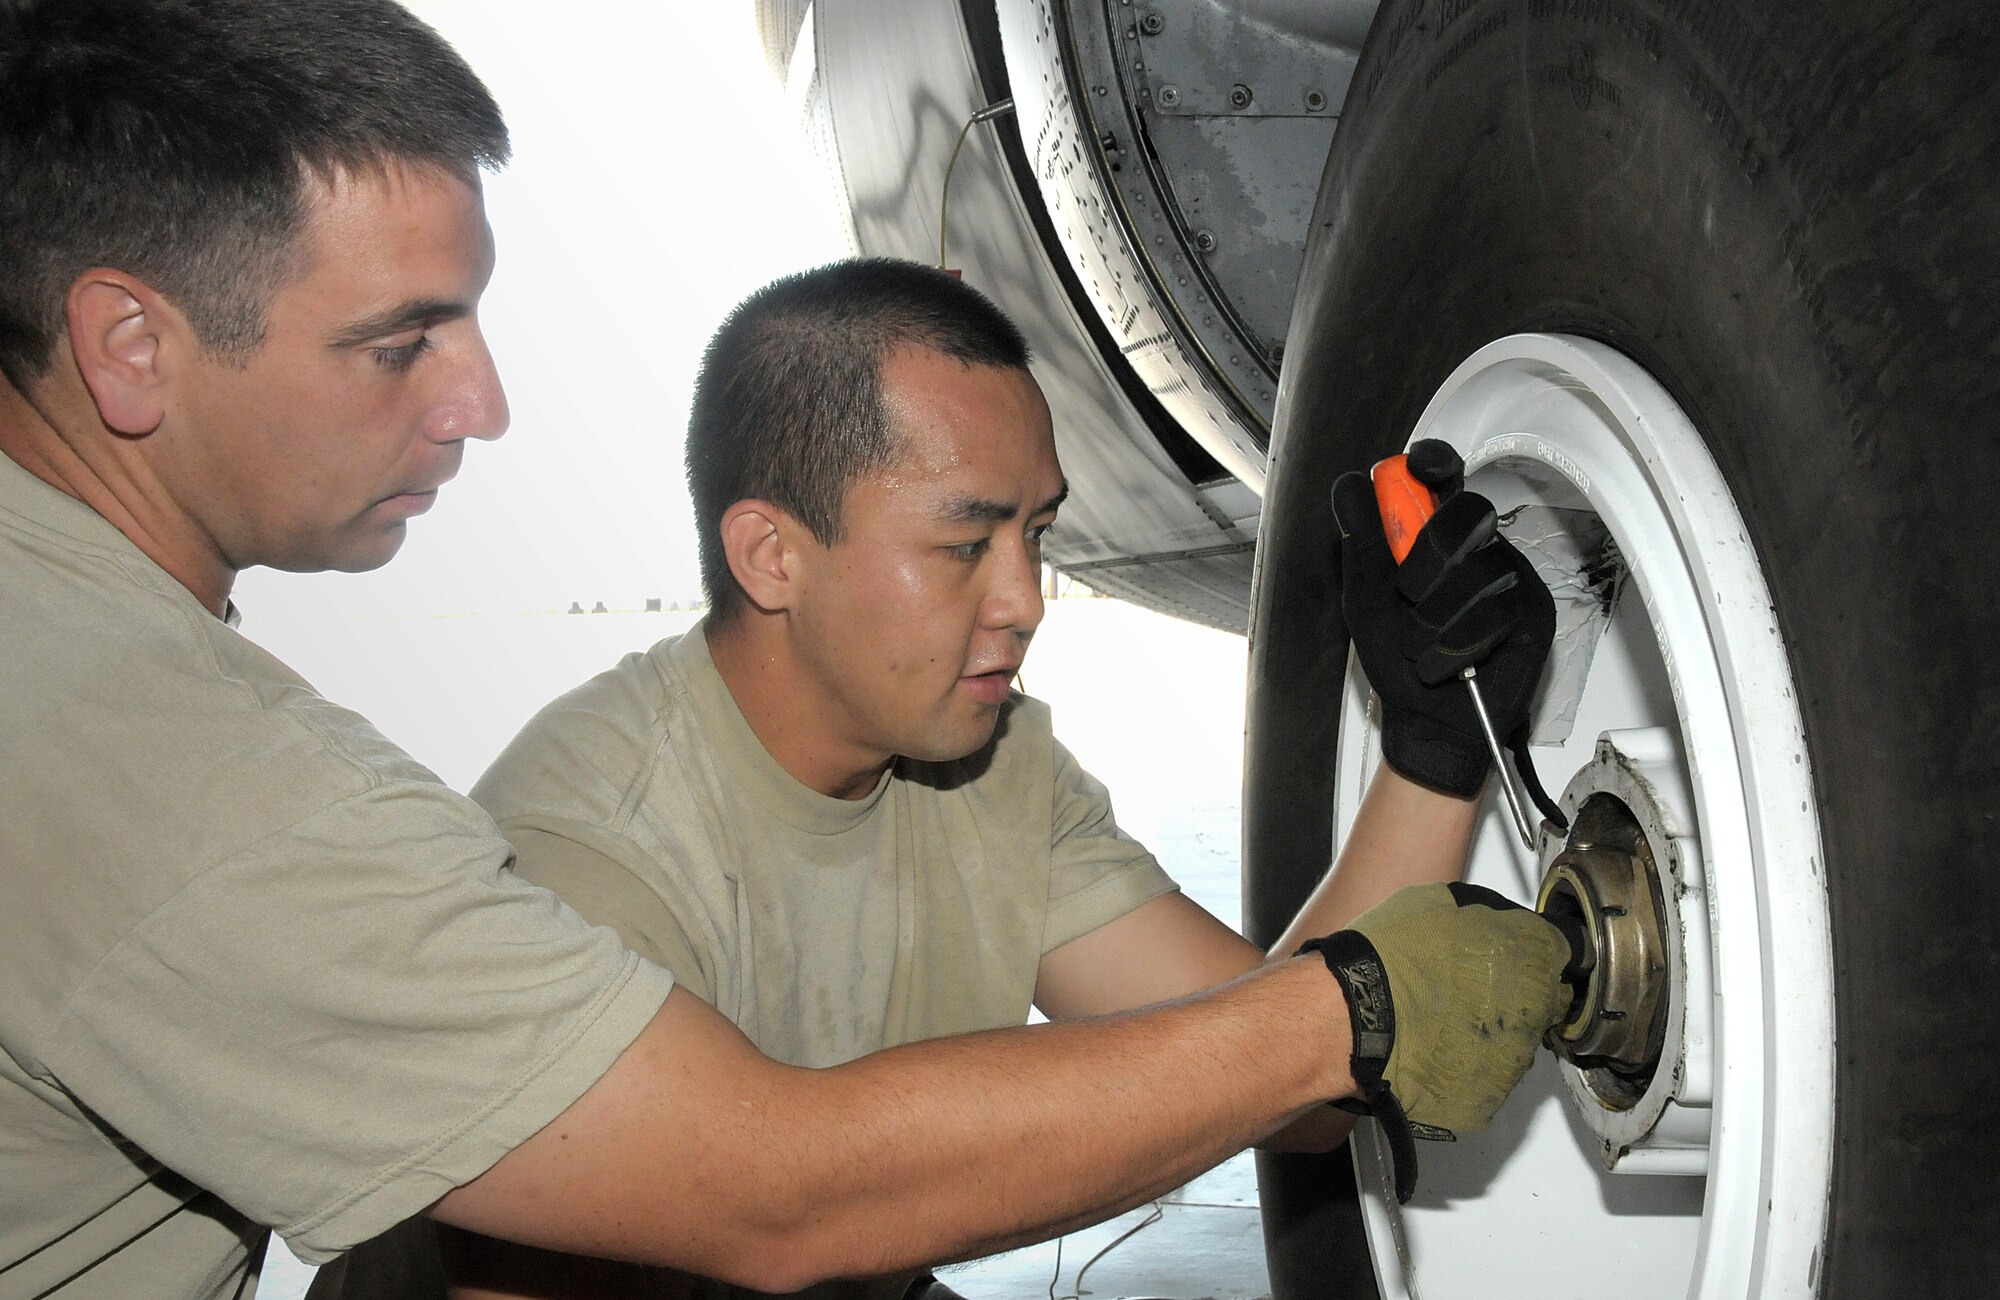 Airman 1st Class Joseph Ray A. Perez assists with changing a tire on a C130-J during a maintenance training exercise with other members of the 146th Aerospace Maintenance Squadron at the 146th Airlift Wing Port Hueneme, Calif. on October 2, 2011. Airman 1st Class Perez is the 146th Airlift Wing's Featured Airman of the Month for October 2011.